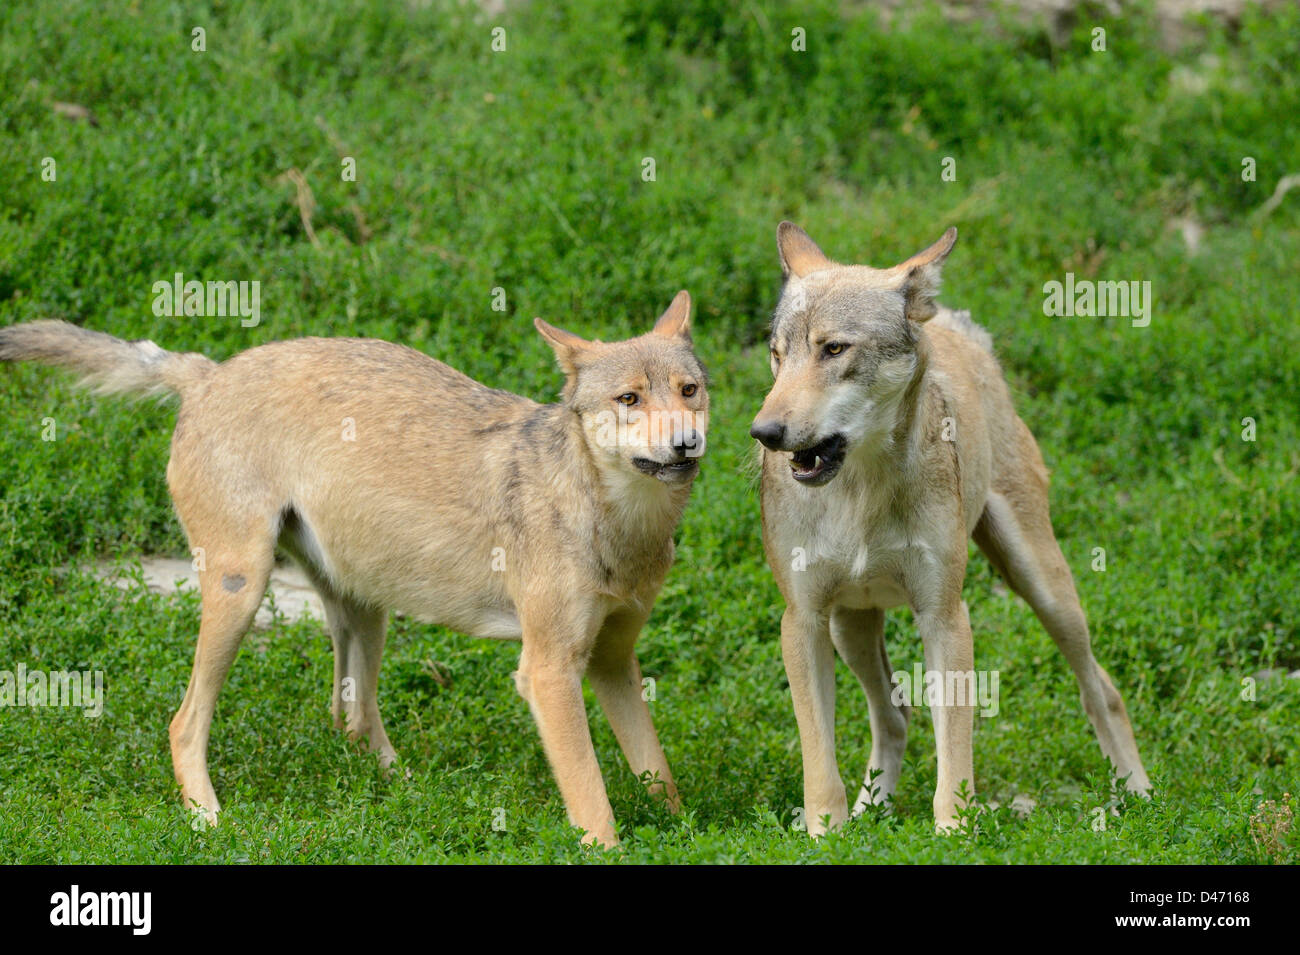 Eastern Wolf (Canis lupus lycaon). Two adults interacting Stock Photo